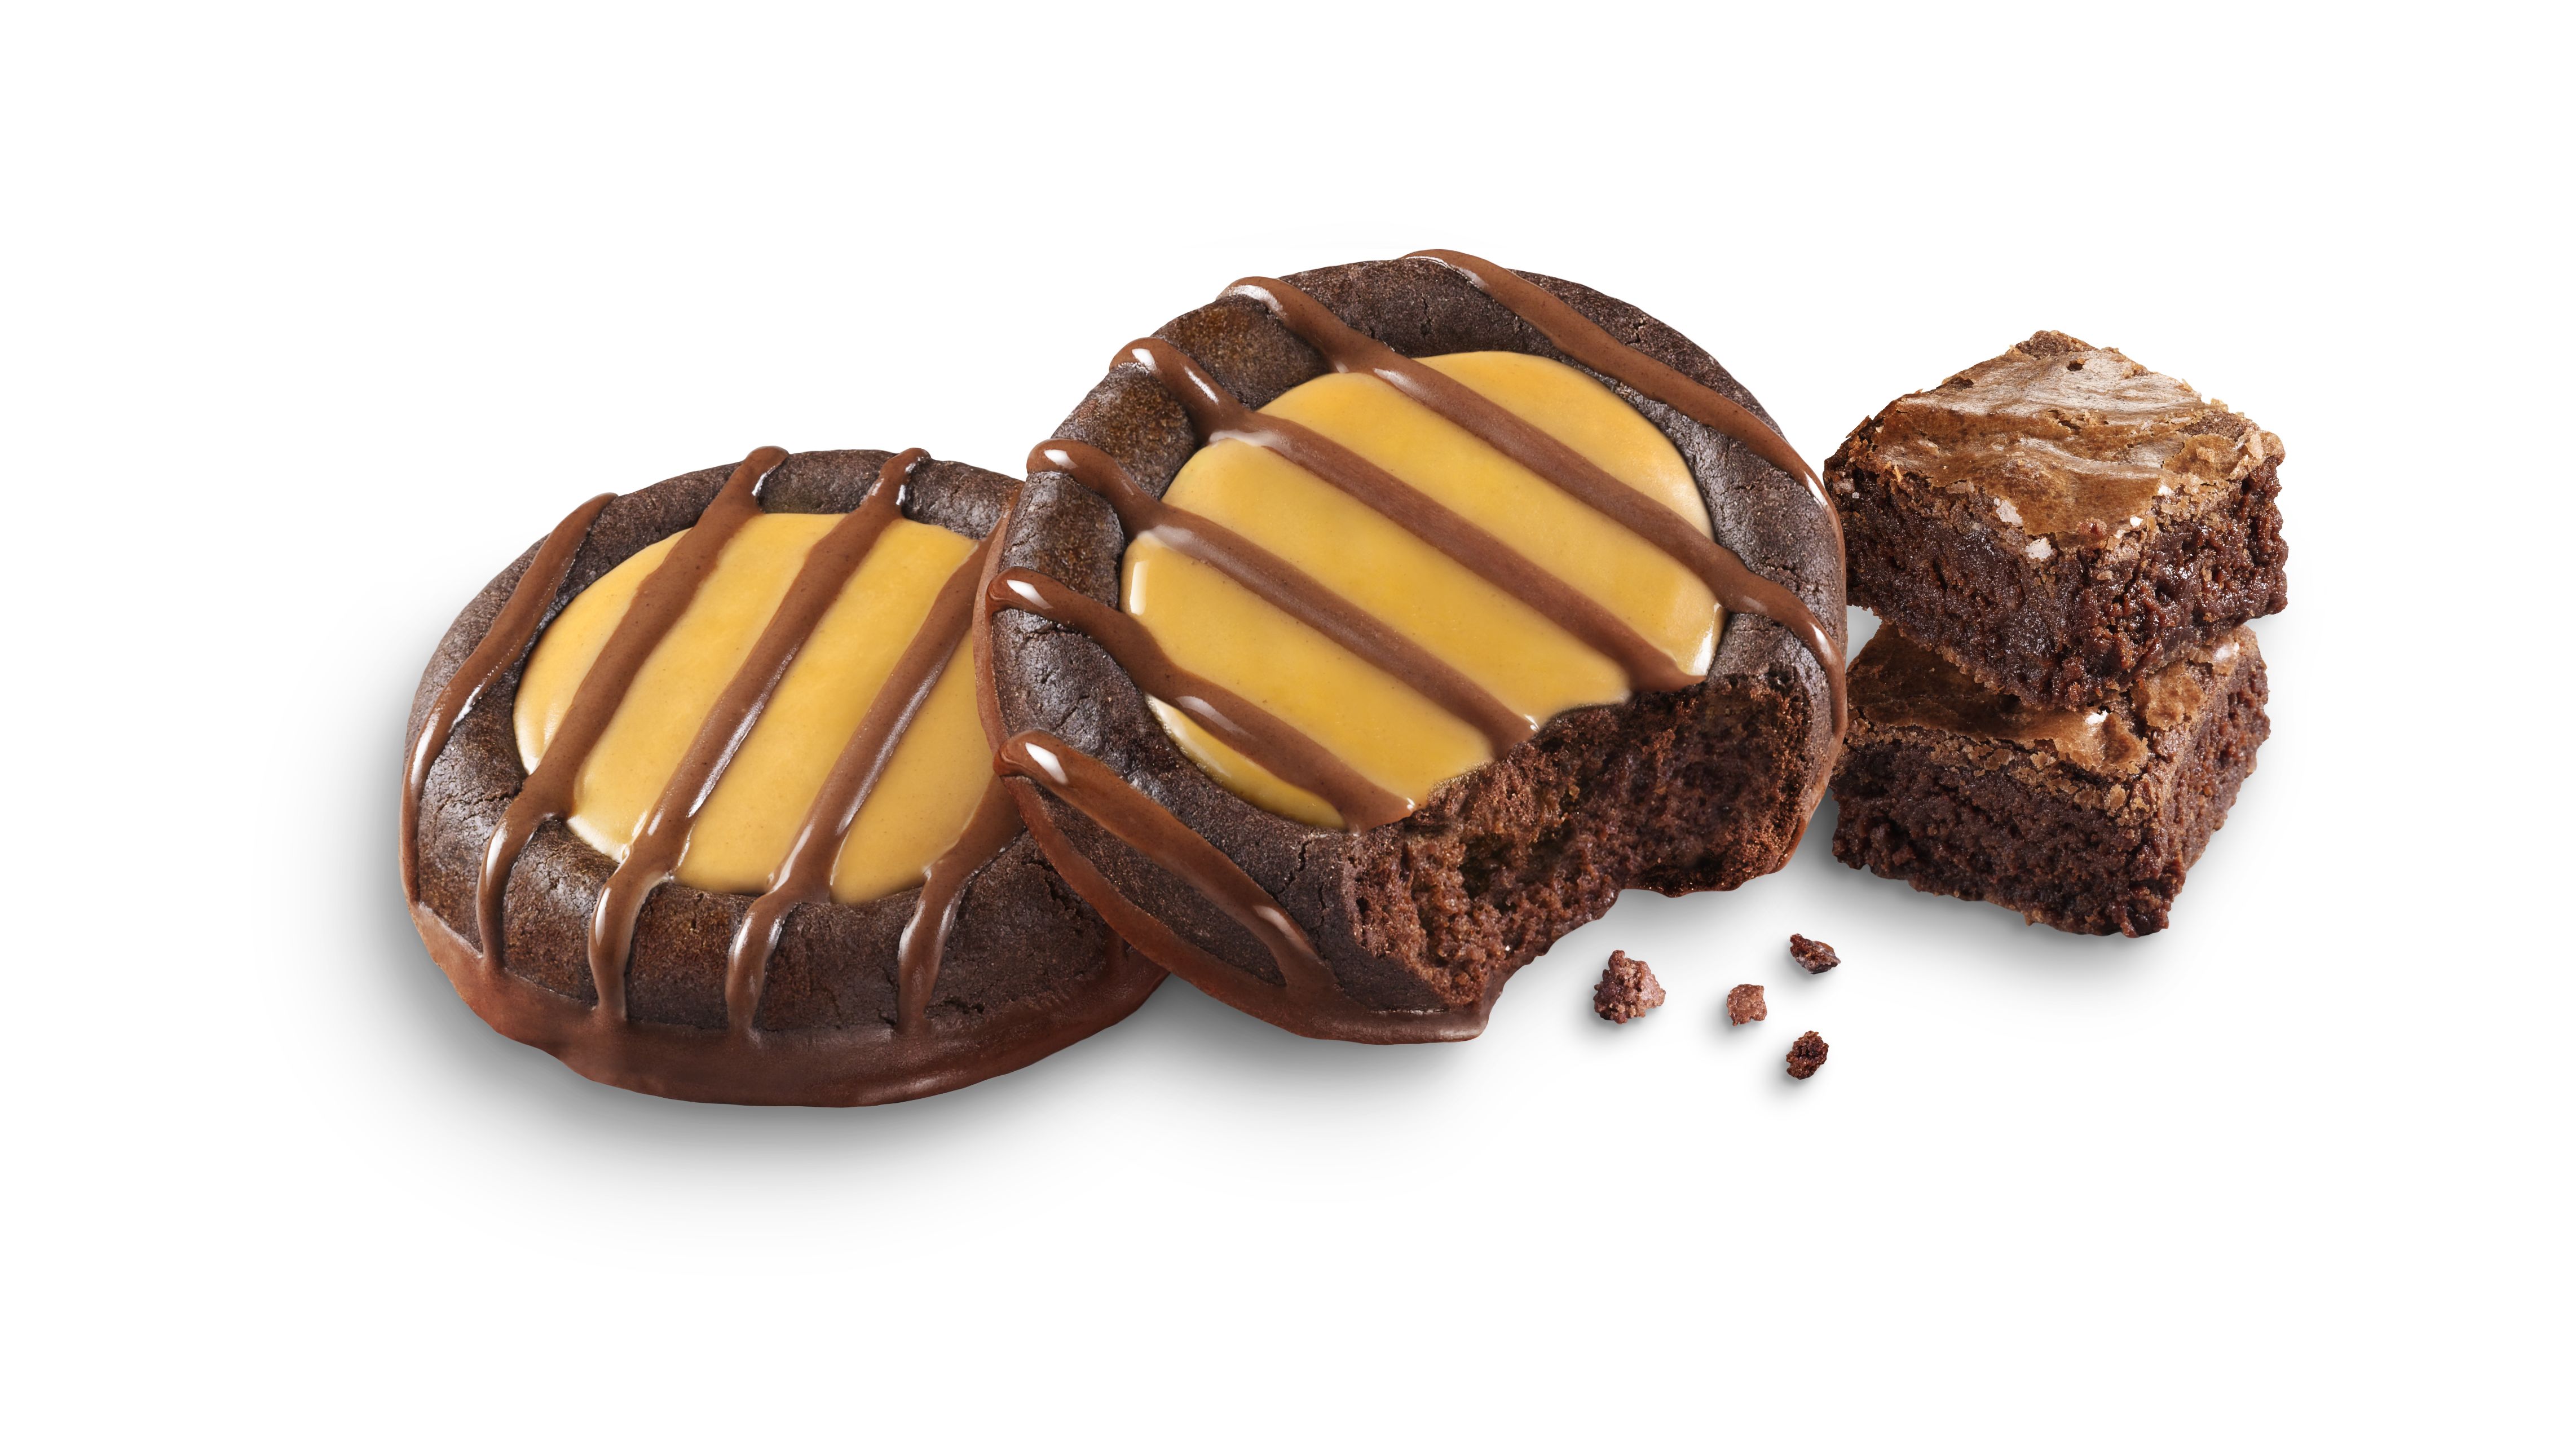 Adventurefuls are the newest Girl Scout Cookies, inspired by fudgy brownies and salted caramel.